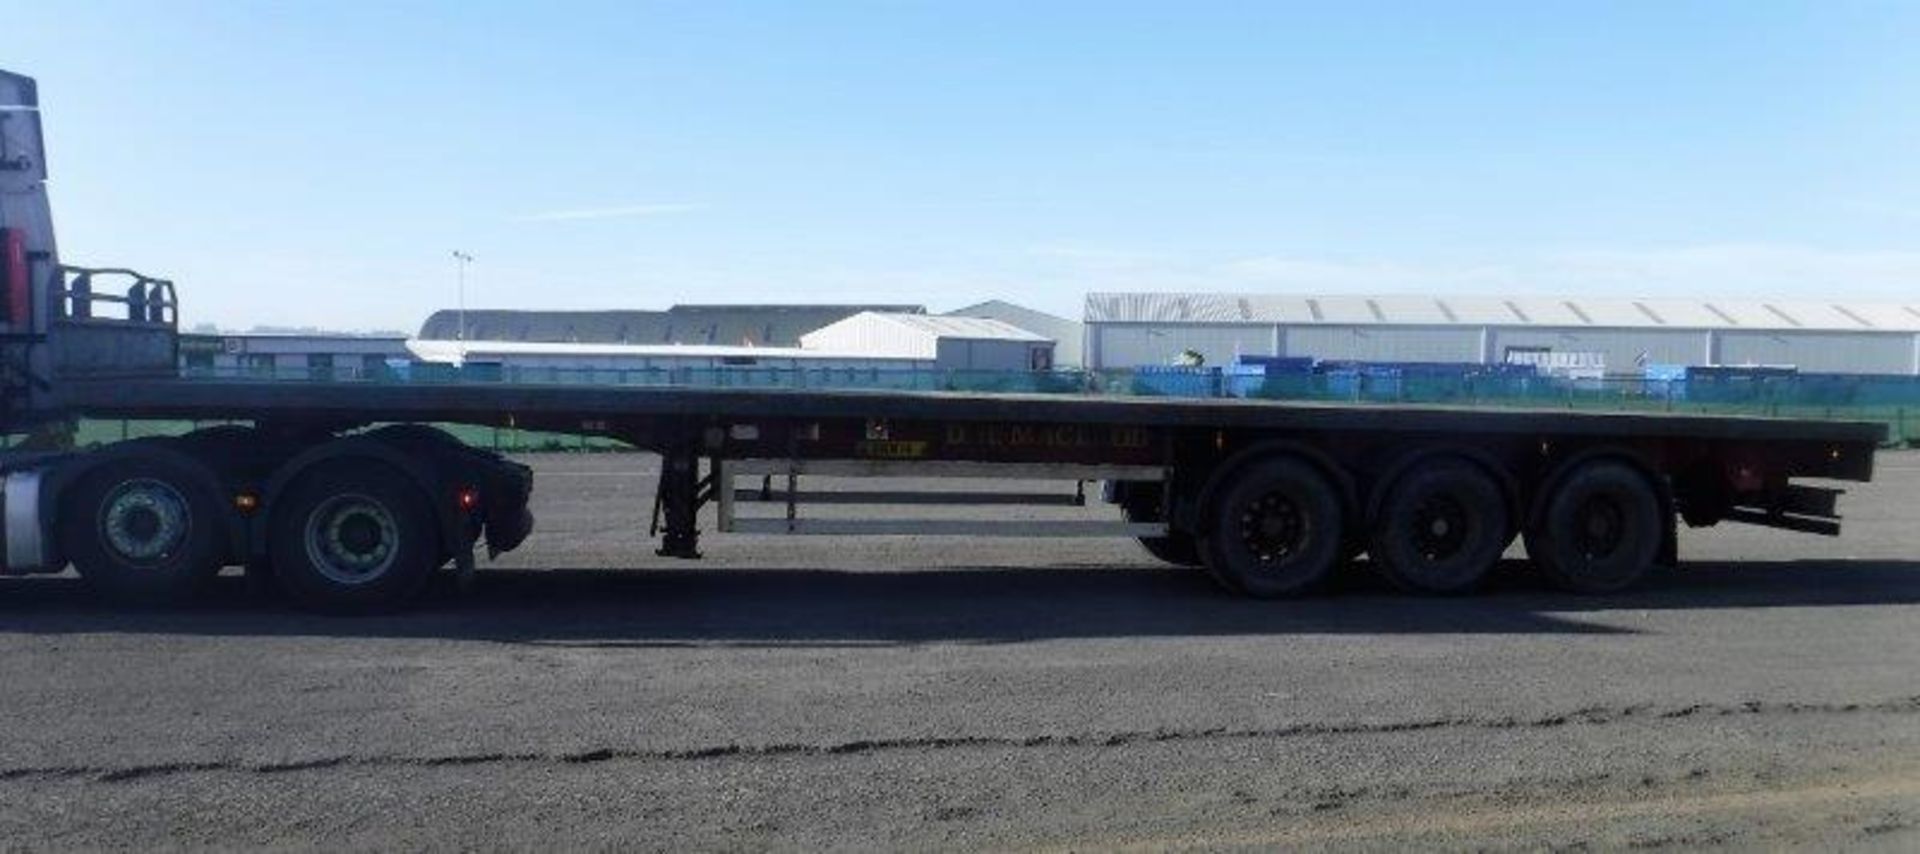 2005 MONTRACON triaxle flat bed trailer MOT April 2019 - Image 5 of 12